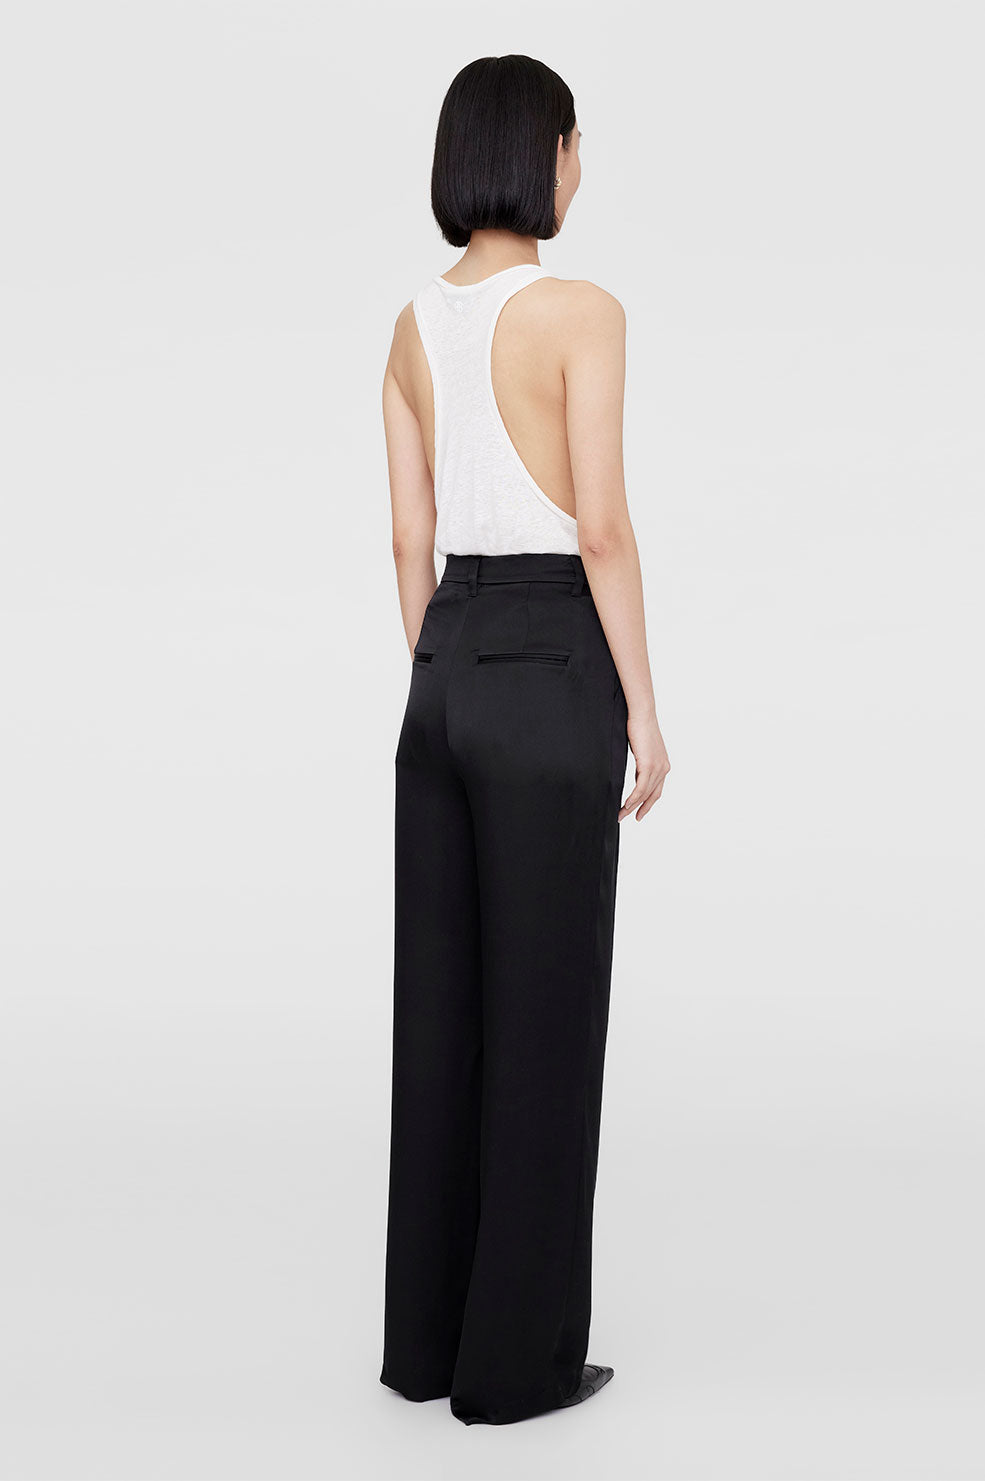 Anine Bing Carrie Pant in Black available at TNT The New Trend Australia.